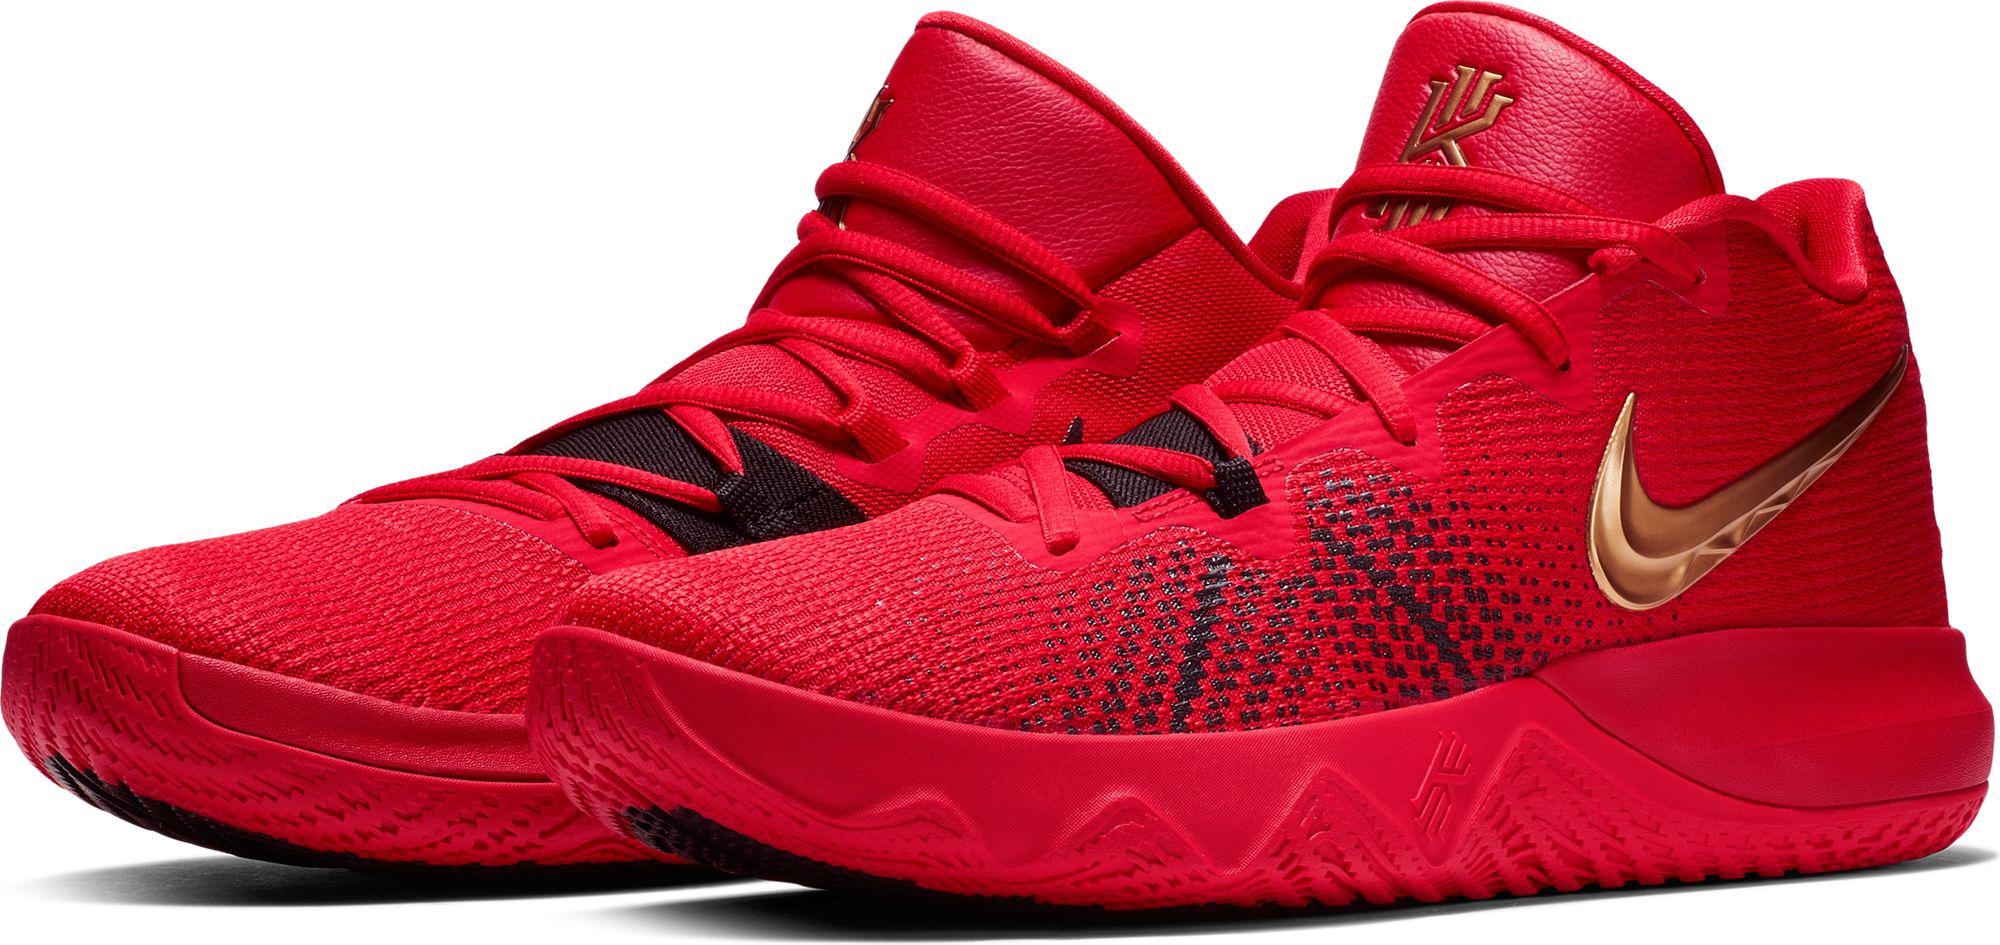 kyrie 3 flytrap red